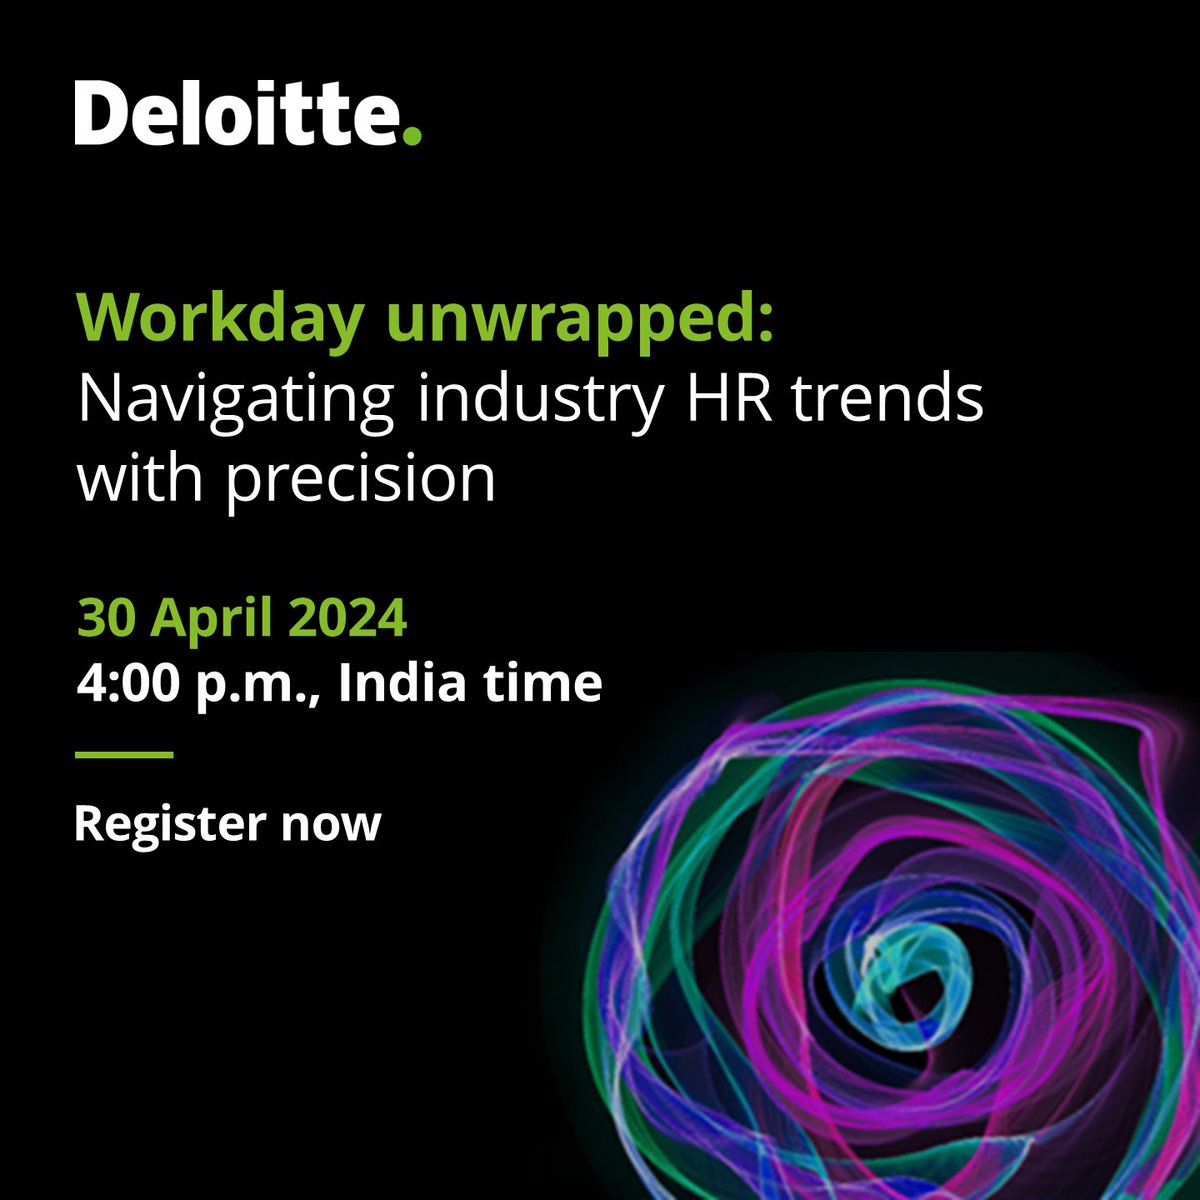 Join us for our upcoming #HR eminence session where we'll dive deep into the latest #HRtrends and explore how Workday's cutting-edge features in the latest “Workday Release” can help you navigate these trends effectively. 
Register: deloi.tt/3xNrMsY
#Workday